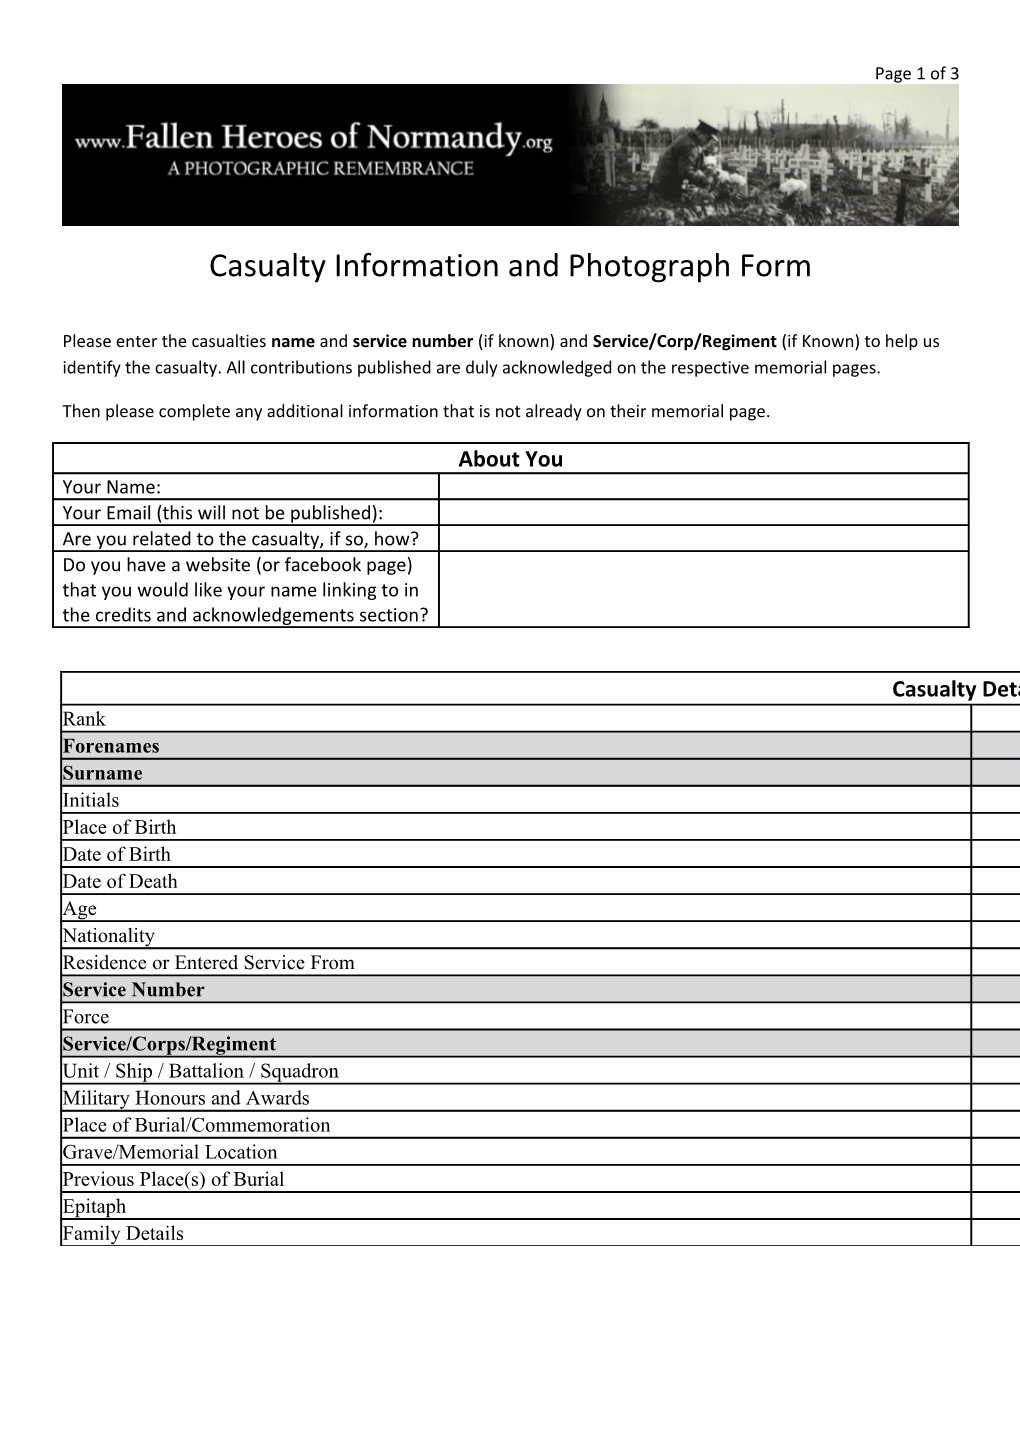 Casualty Information and Photograph Form